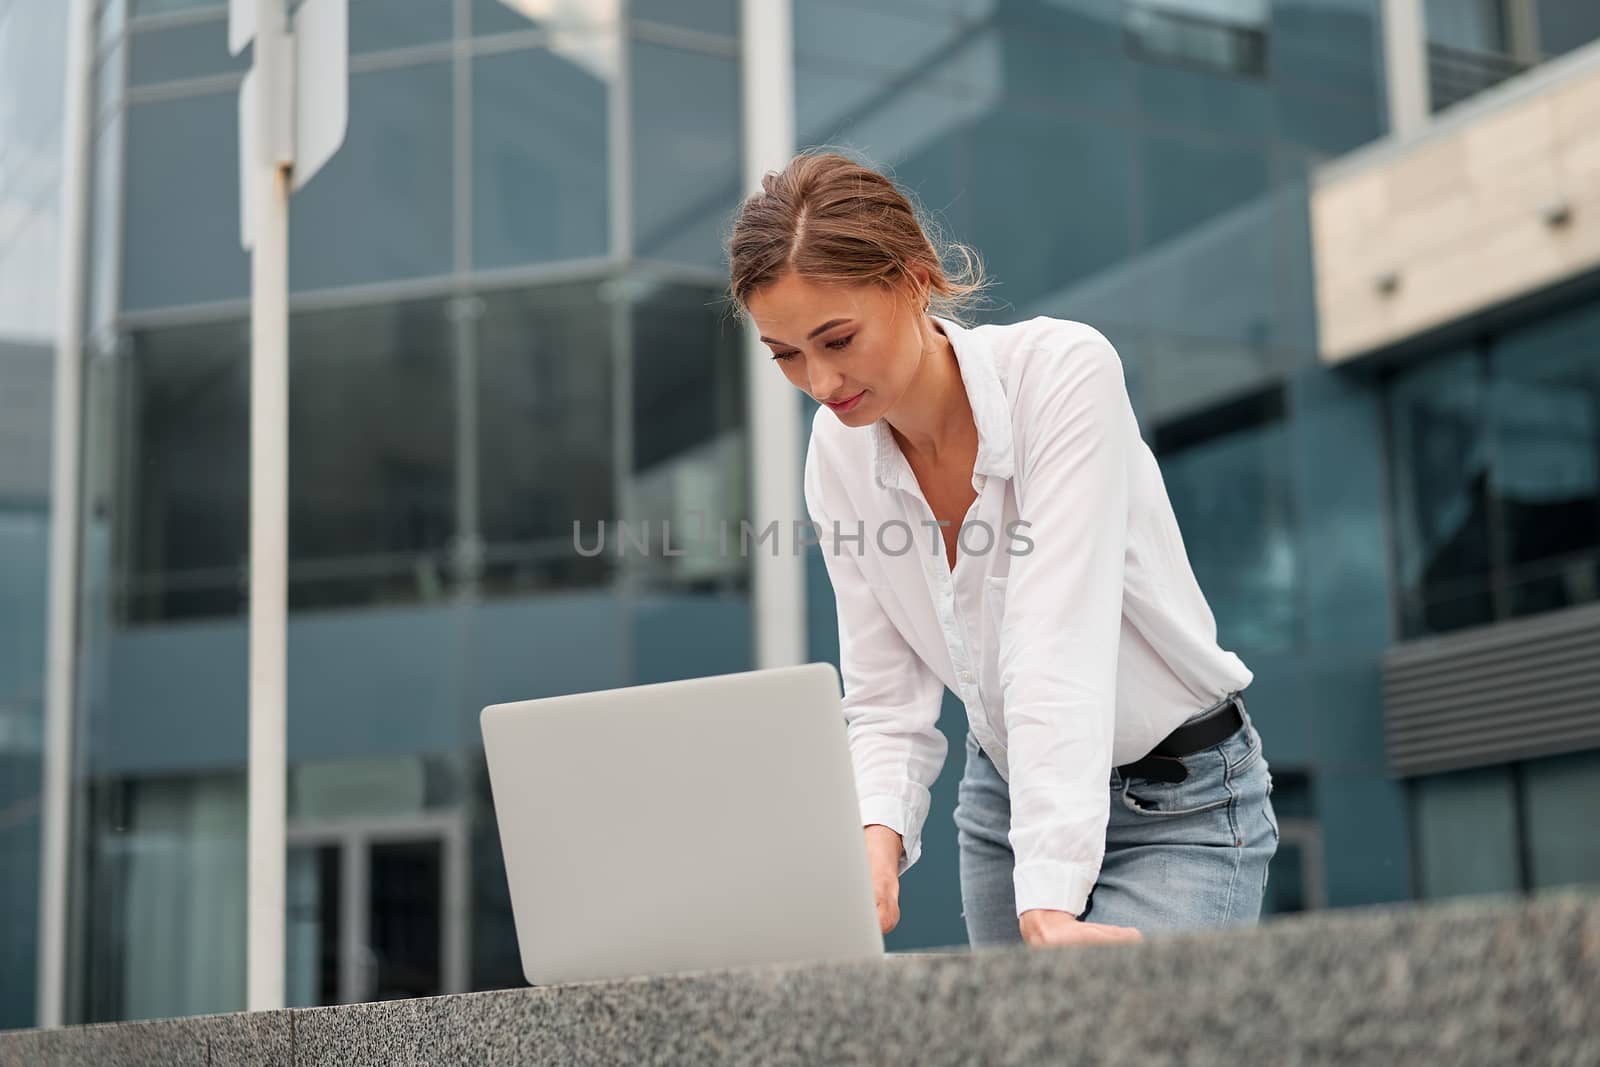 Businesswoman successful woman business person outdoor corporate building exterior with laptop Pensive elegance cute caucasian professional business woman middle age ecommerce deal Online banking